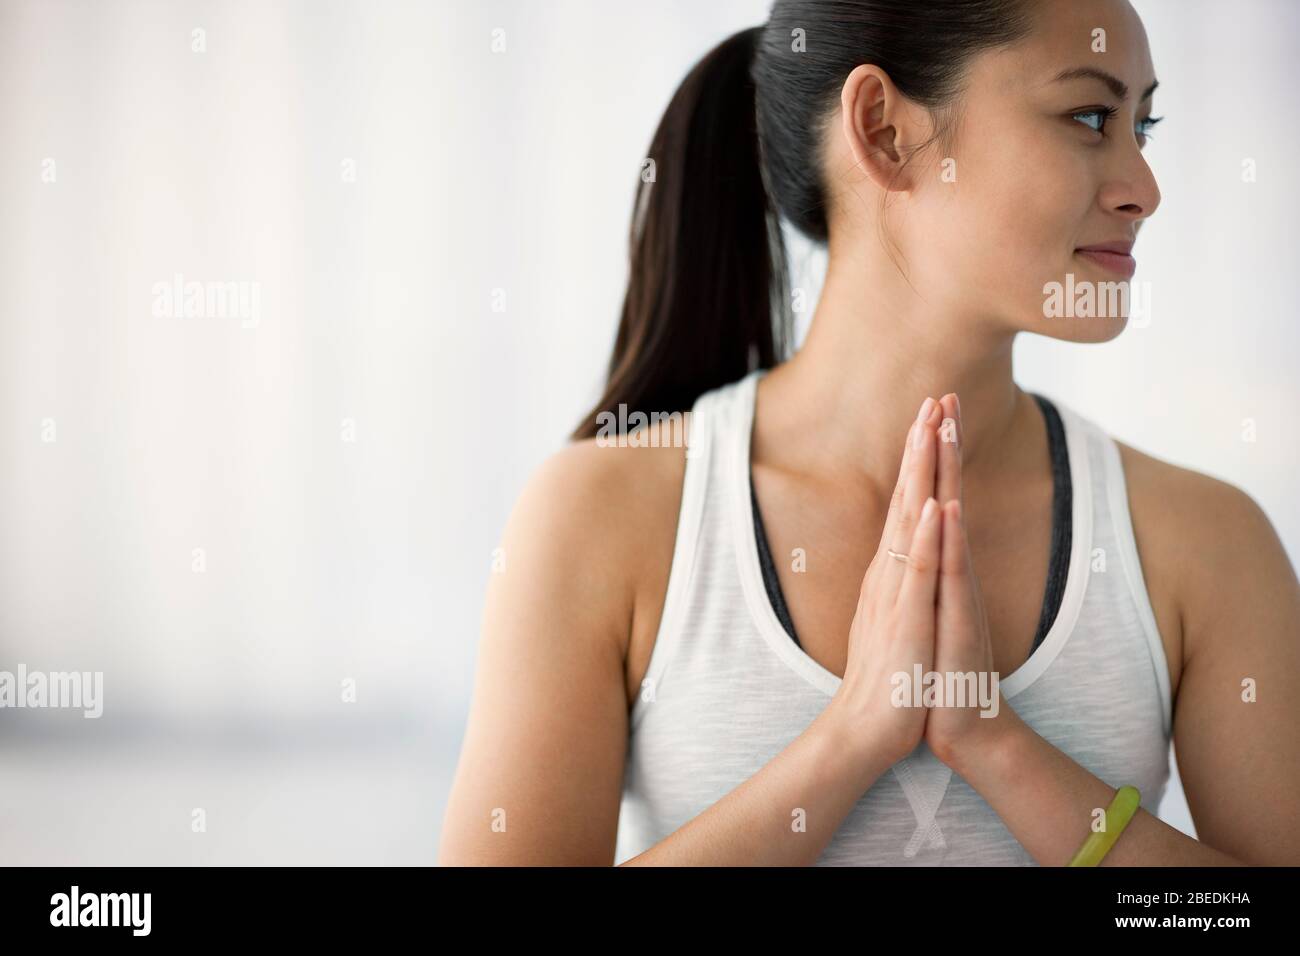 Happy young woman standing with her hands together in a yoga pose Stock Photo